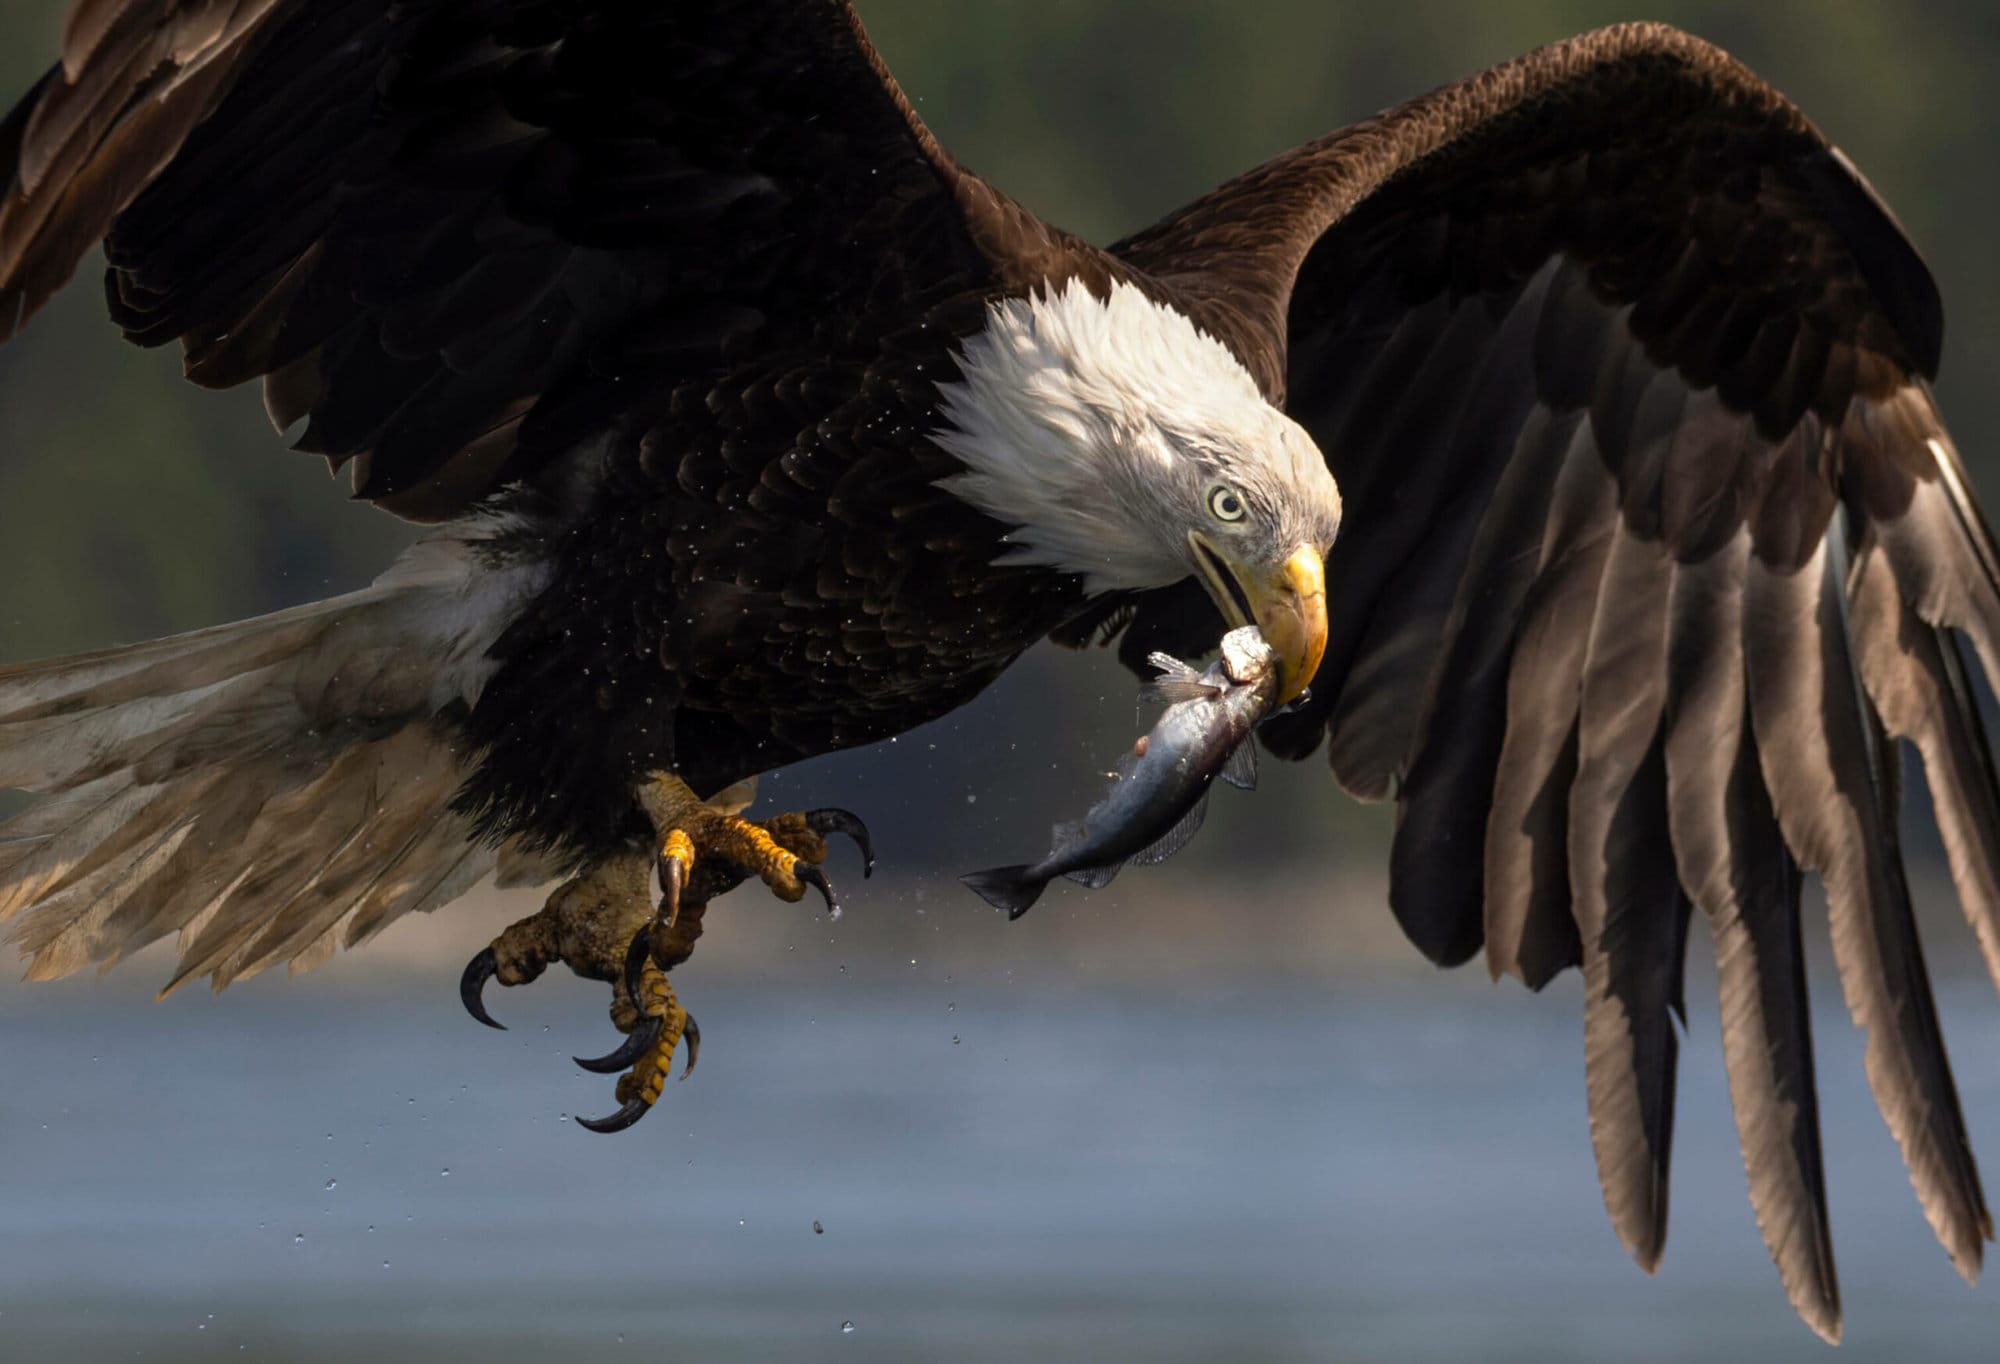 an eagle is holding a fish in its talon